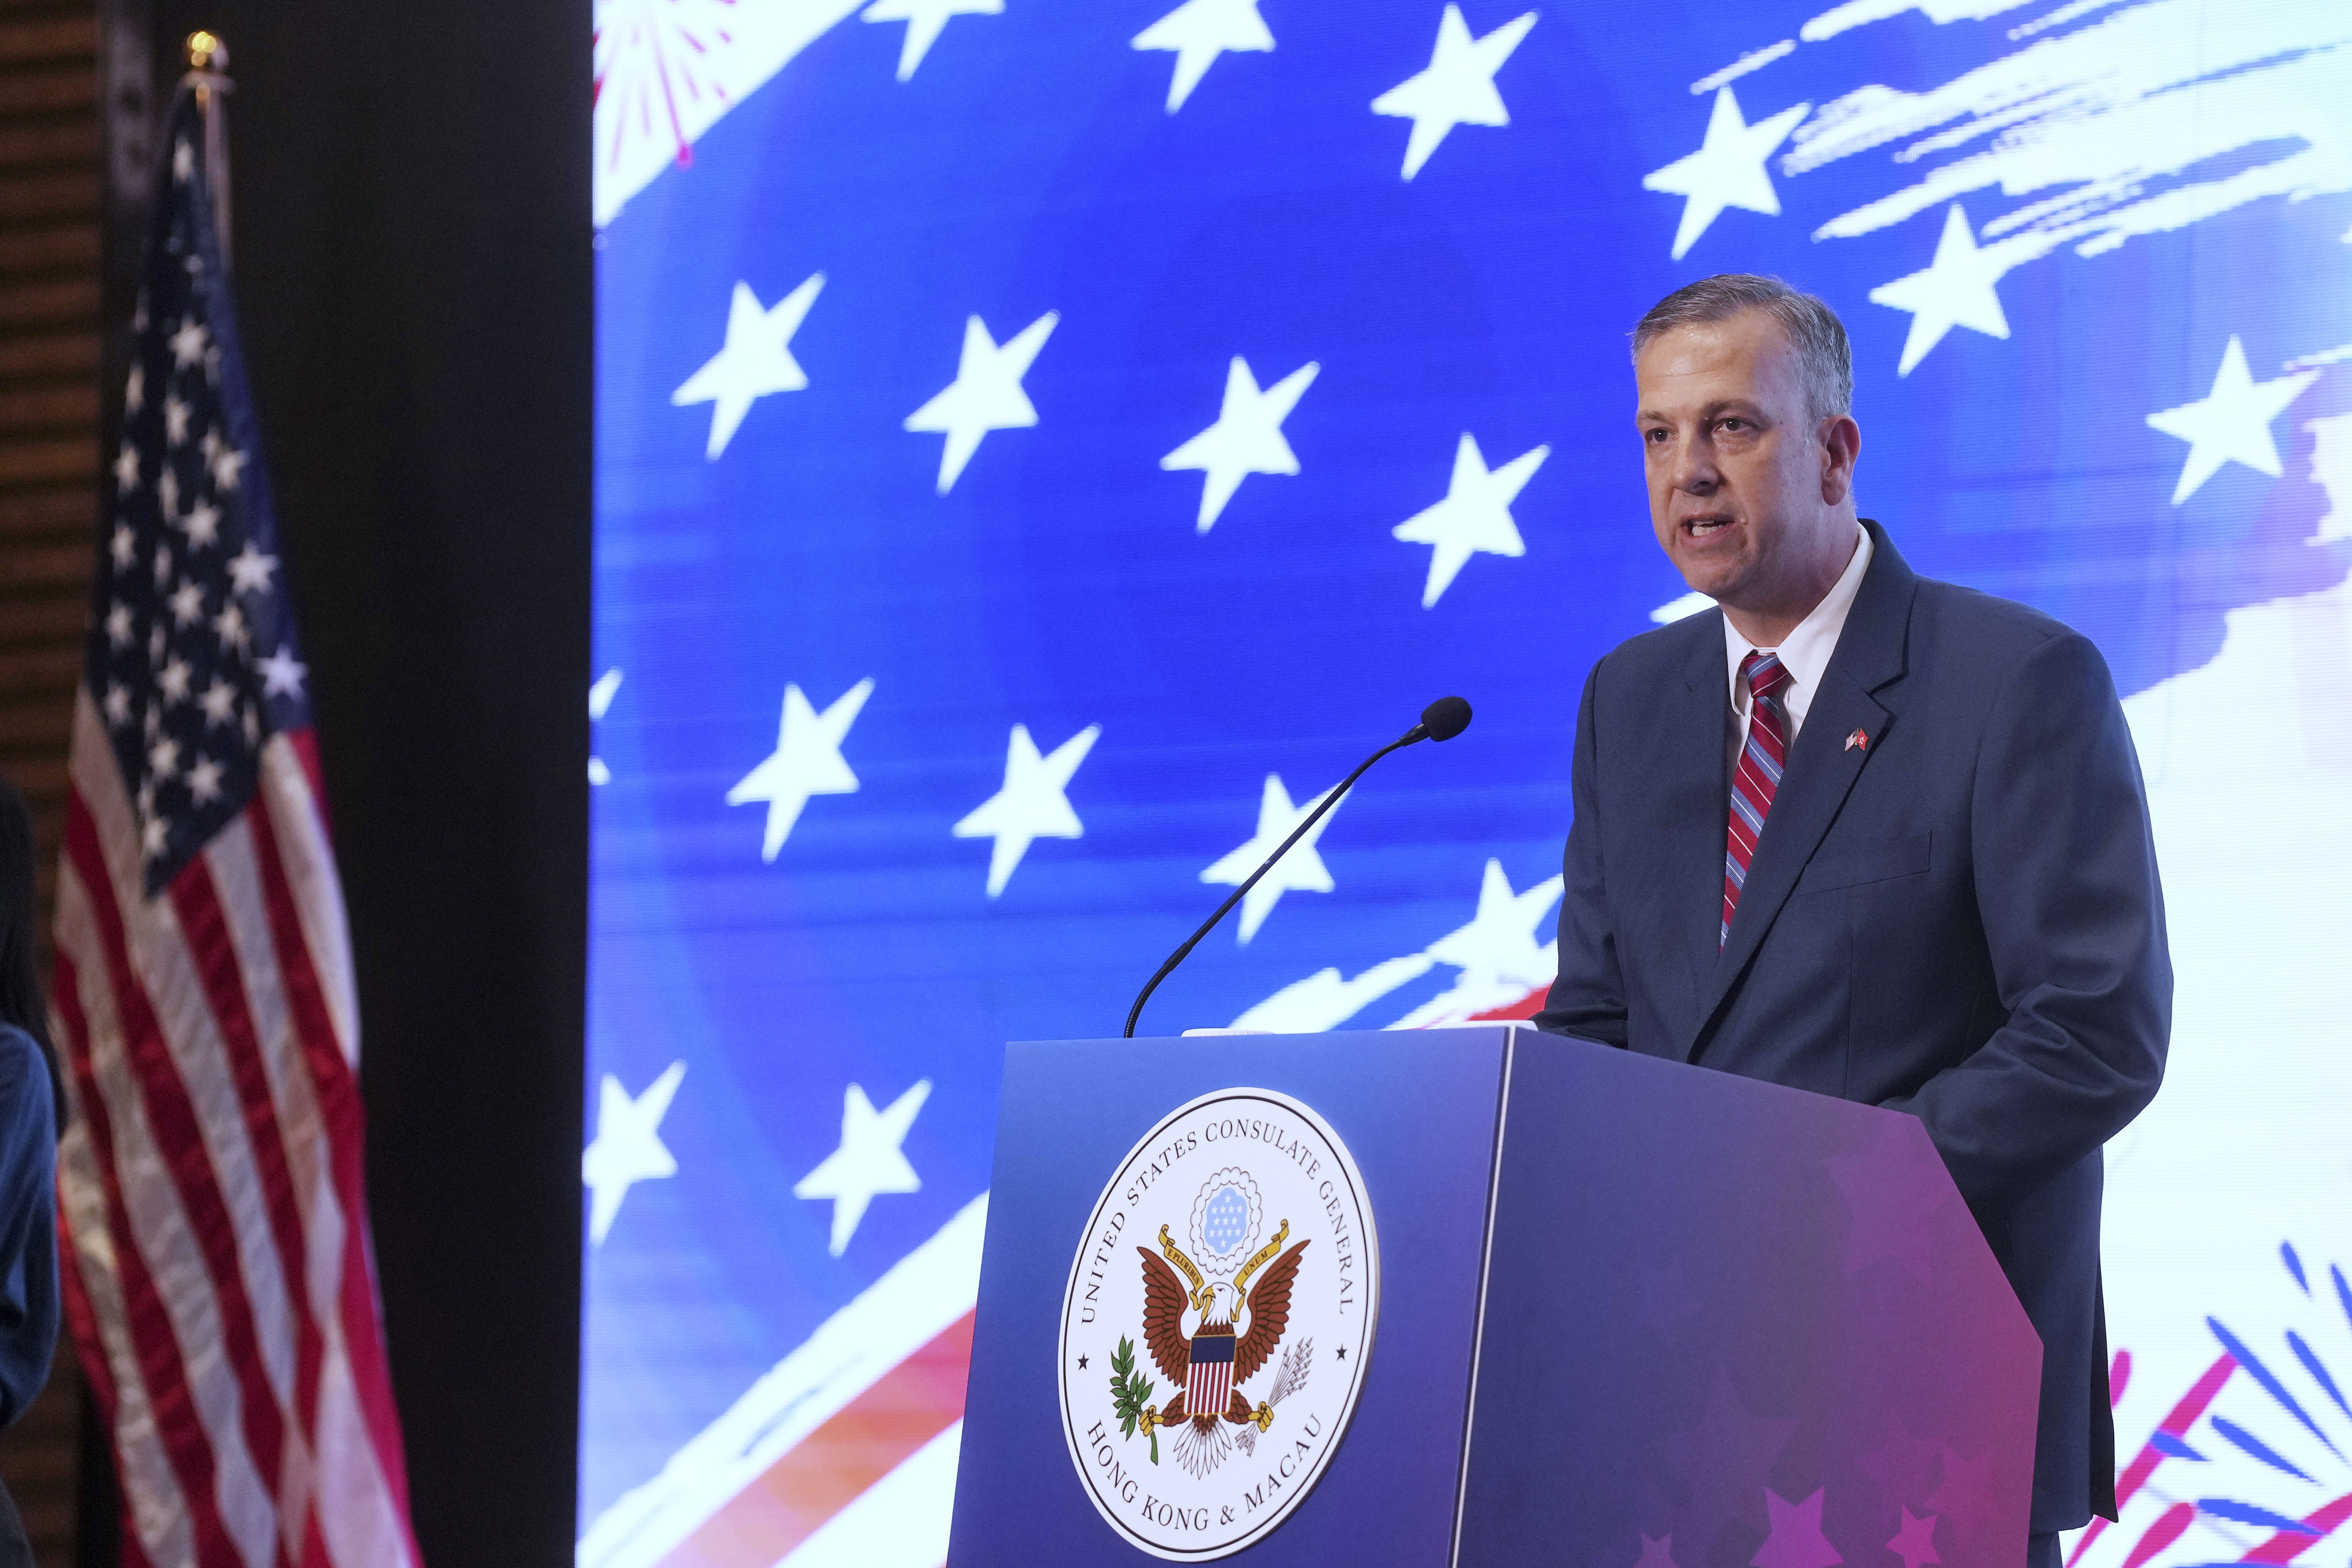 Gregory May, US consul general to Hong Kong and Macau, speaks at a reception ahead of America’s Independence Day celebration on July 4. Photo: Elson Li